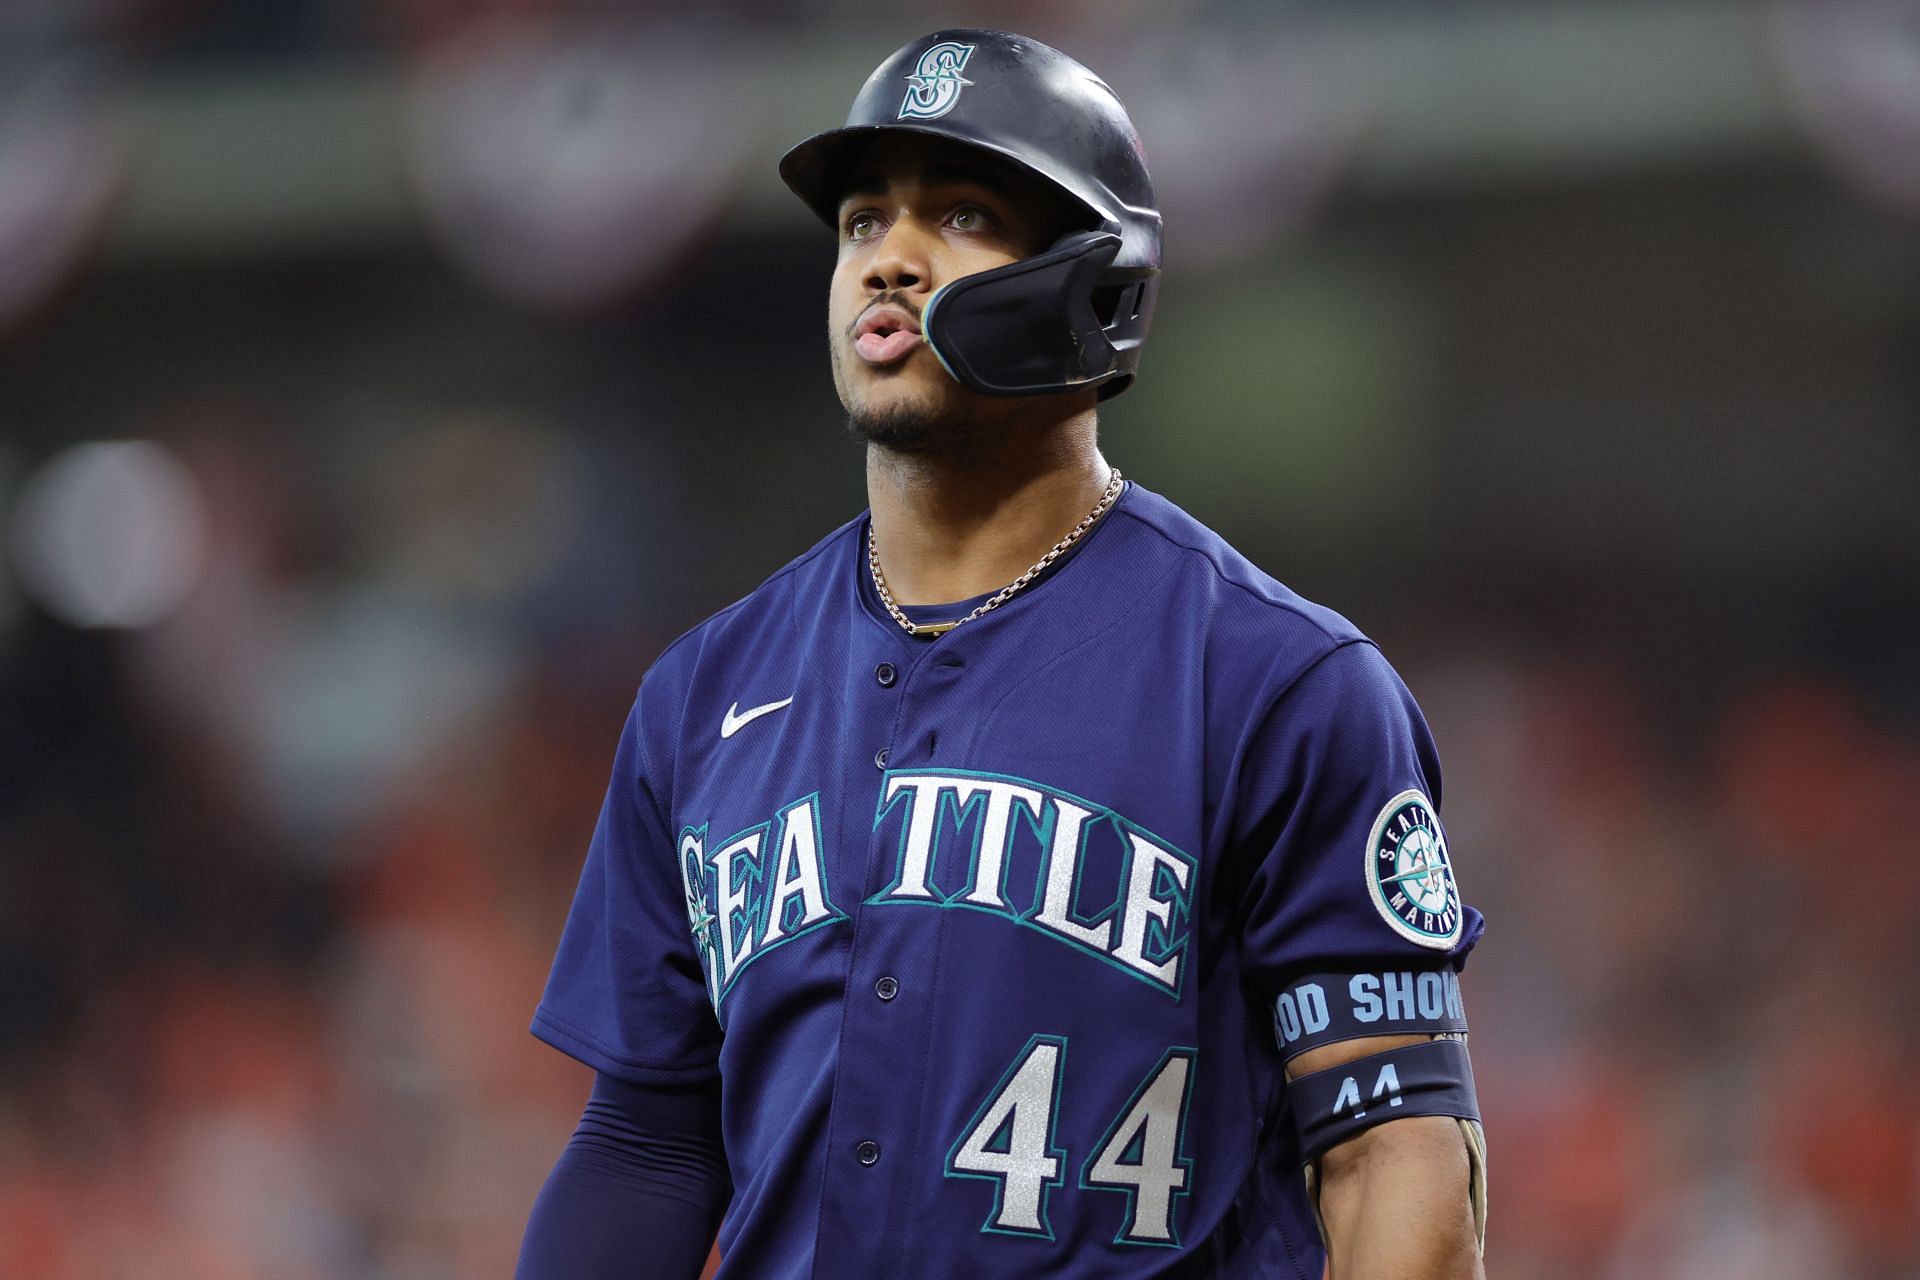 Rodríguez stays hot as Mariners beat Astros 2-0 - The Columbian